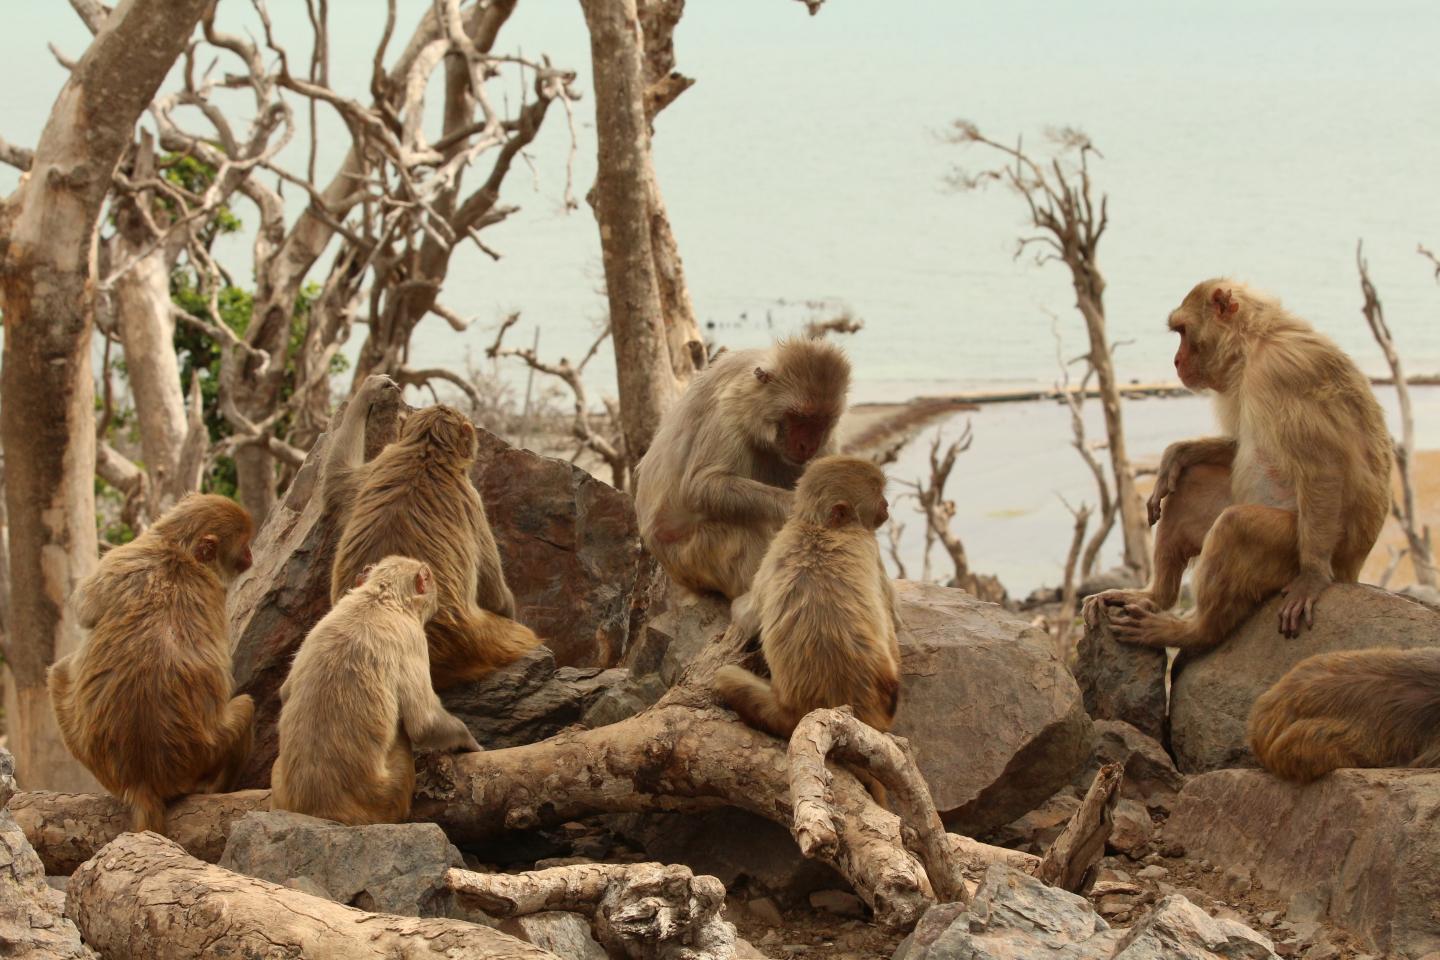 A group of tannish monkeys sitting on rocks. Behind them are bare trees and farther beyond that, water.